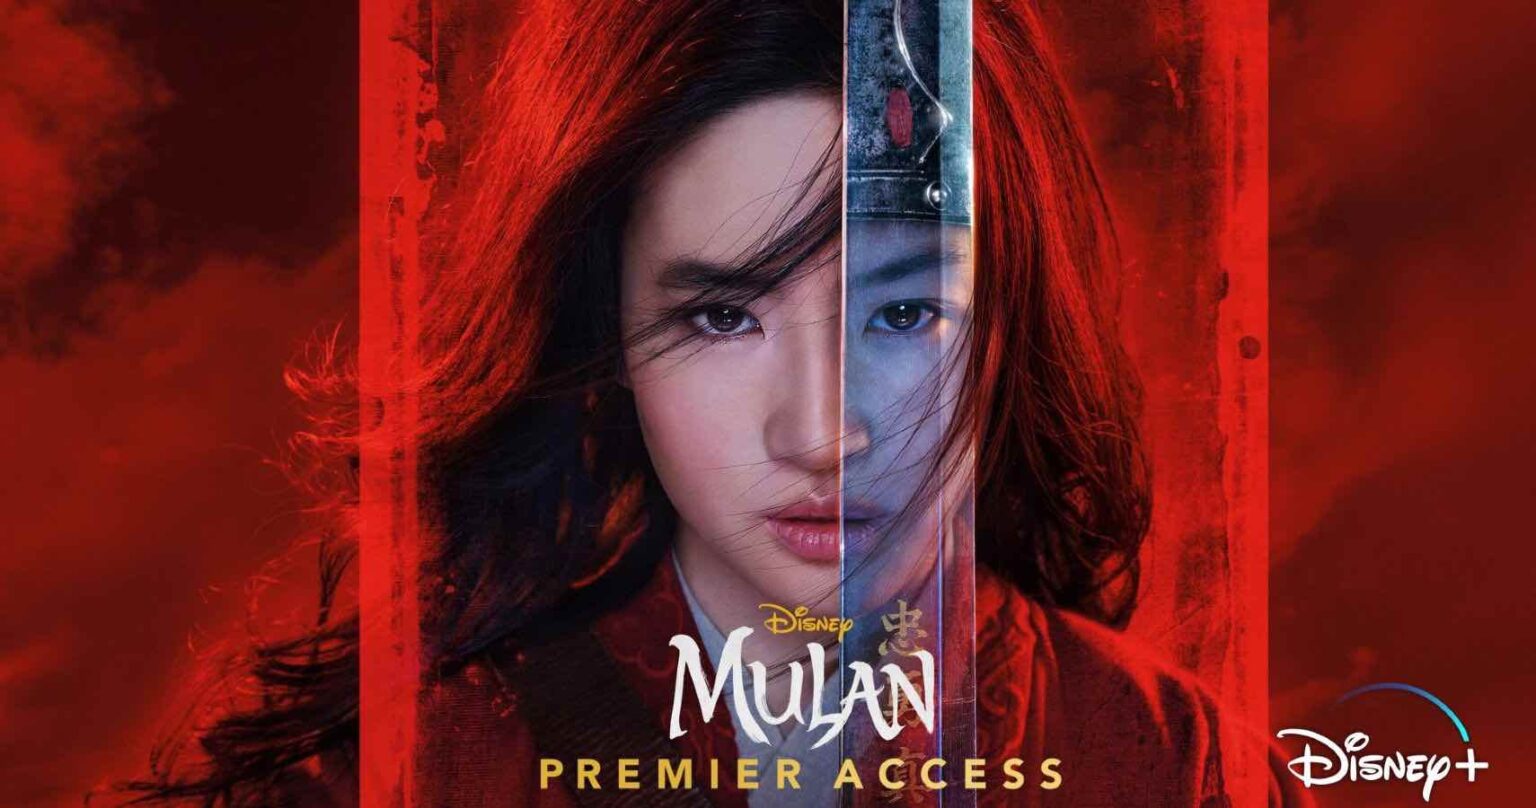 People have some rather mixed feelings about the release of 'Mulan', the latest Disney remake. Here are our favorite memes on the subject.